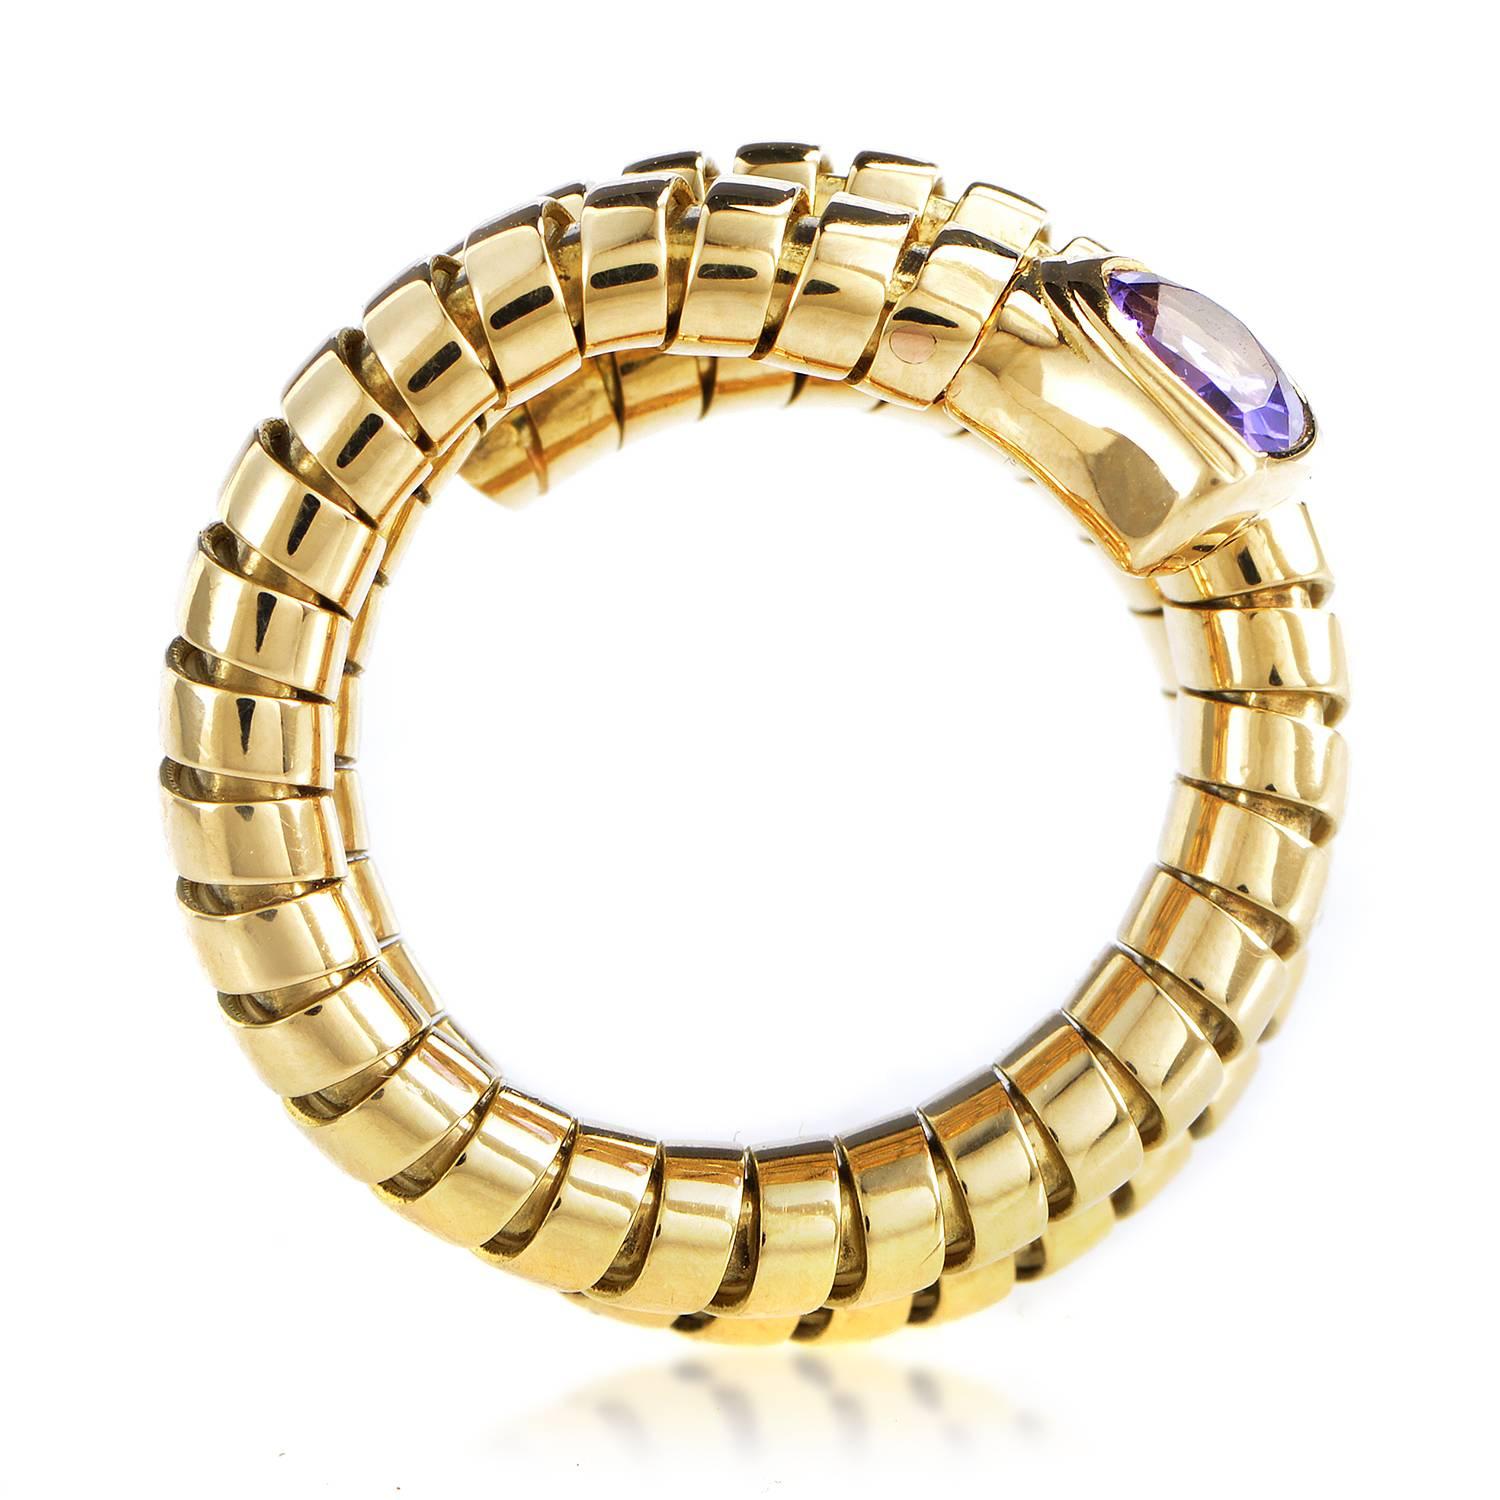 A fascinating item of intriguingly offbeat nature and strong prestigious allure produced by the radiant 18K yellow gold, this compelling ring from Bulgari boasts an amazing form on the end of which a delightful amethyst is placed.
Ring Size: 5.0